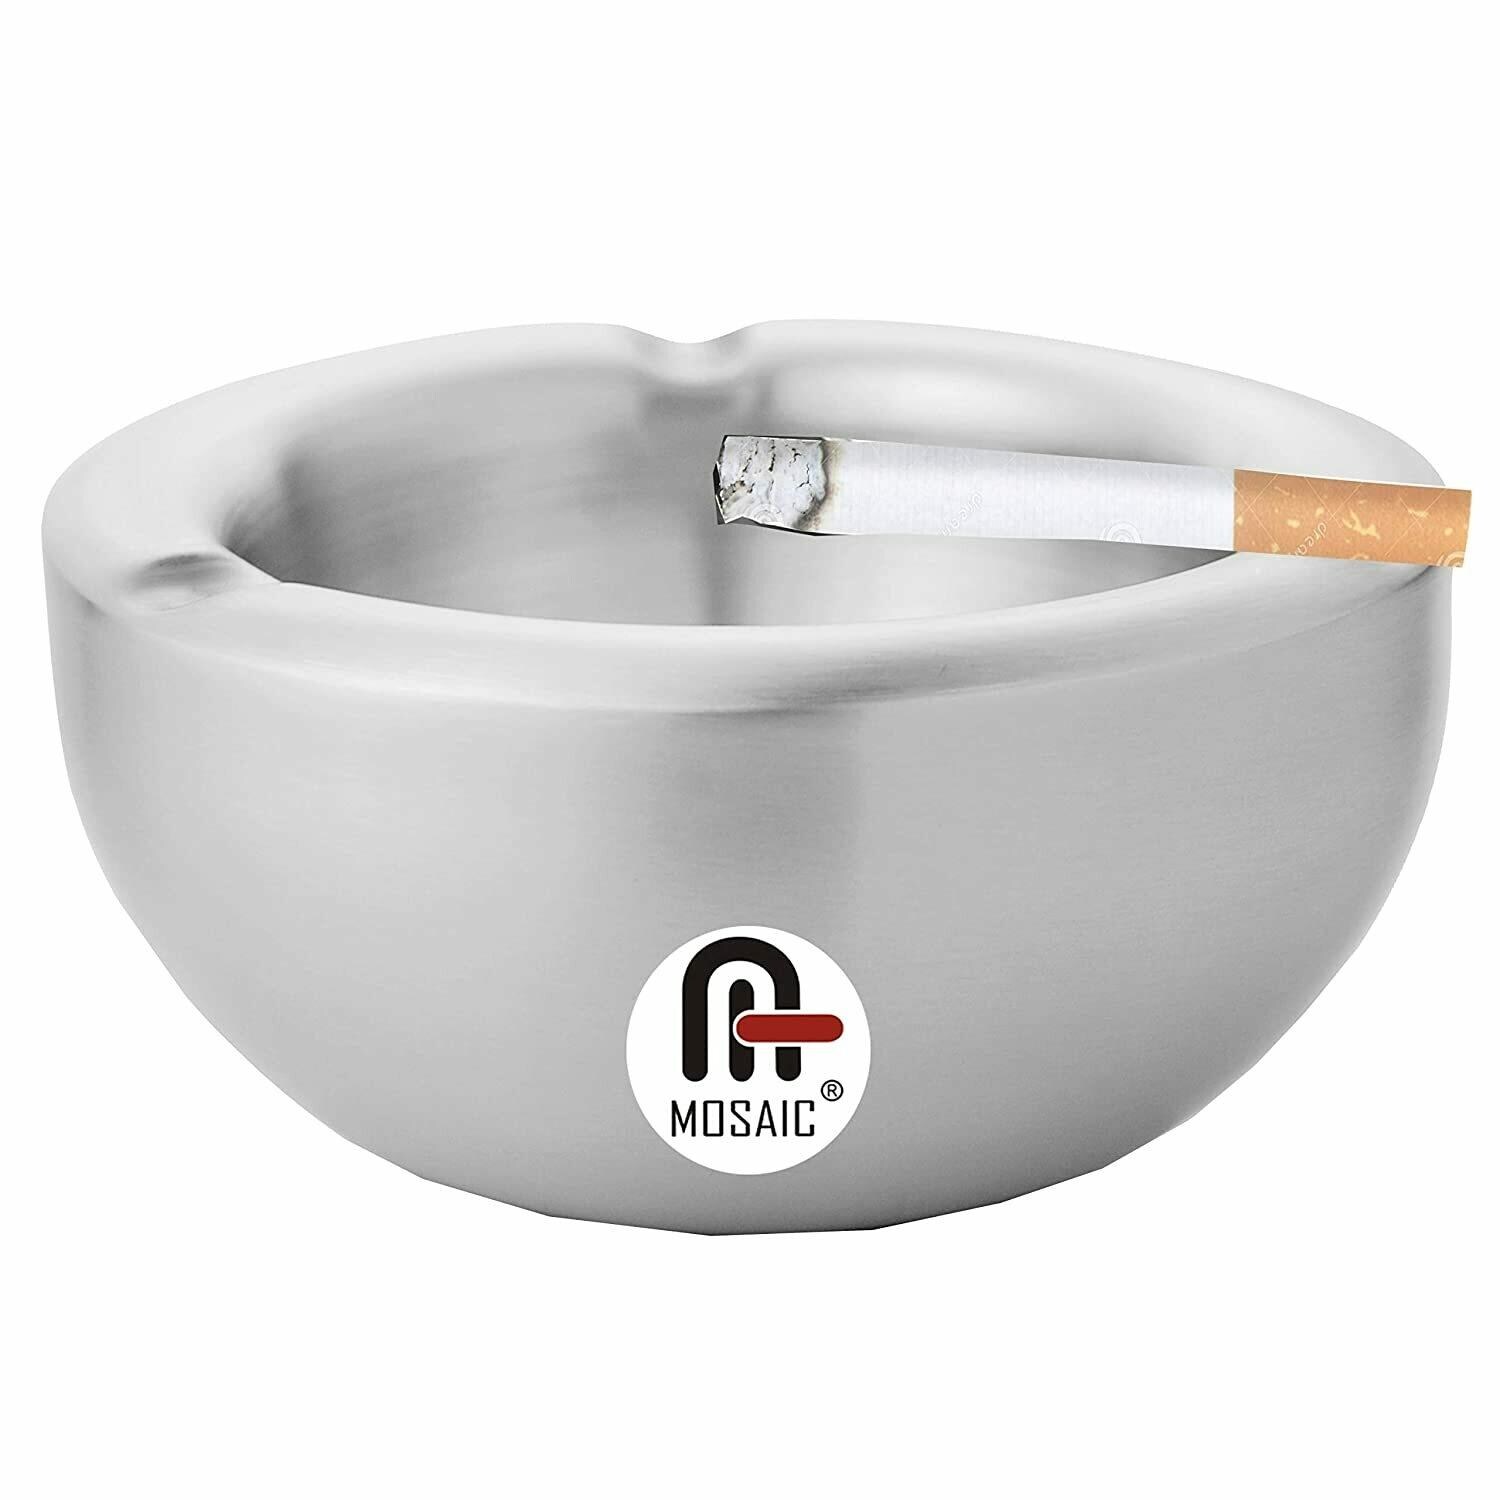 Stainless Steel Mini Trash Can Tabletop Cigar Ashtray Home Office Bar Car